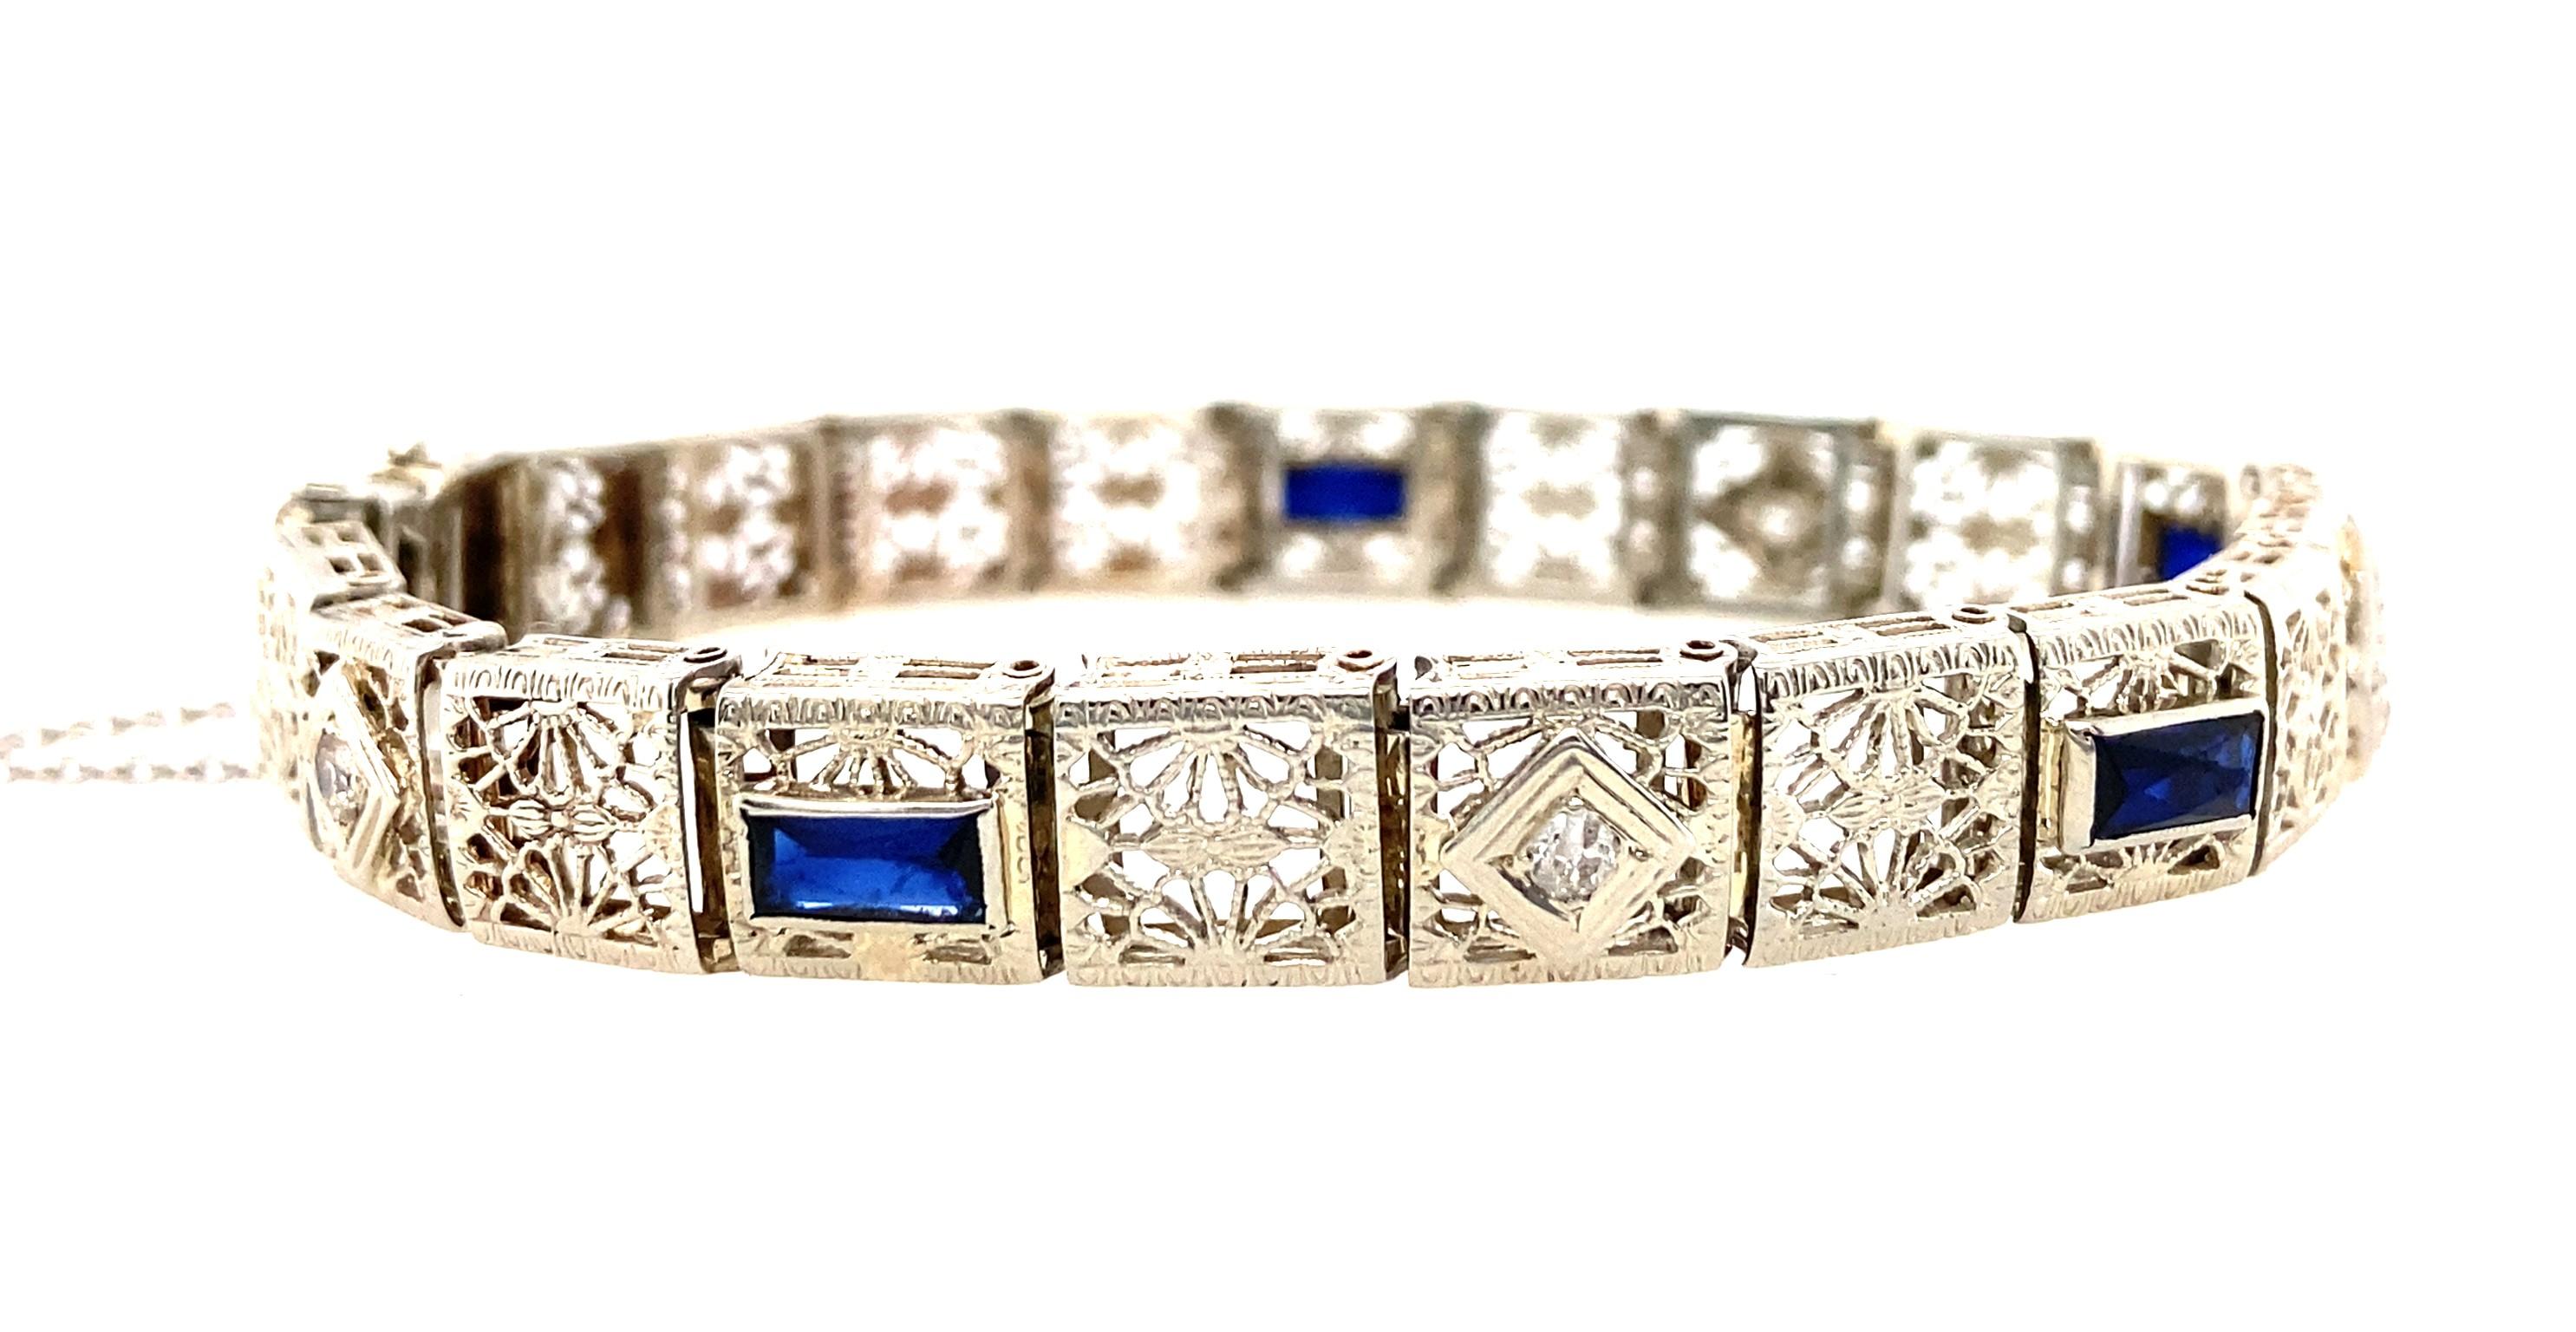 The art deco period was marked by an exuberance for all things new and marked a dramatic shift in style and culture. This bracelet was created in the moment of this great shift, and we can imagine a young woman clasping this bracelet on her wrist,